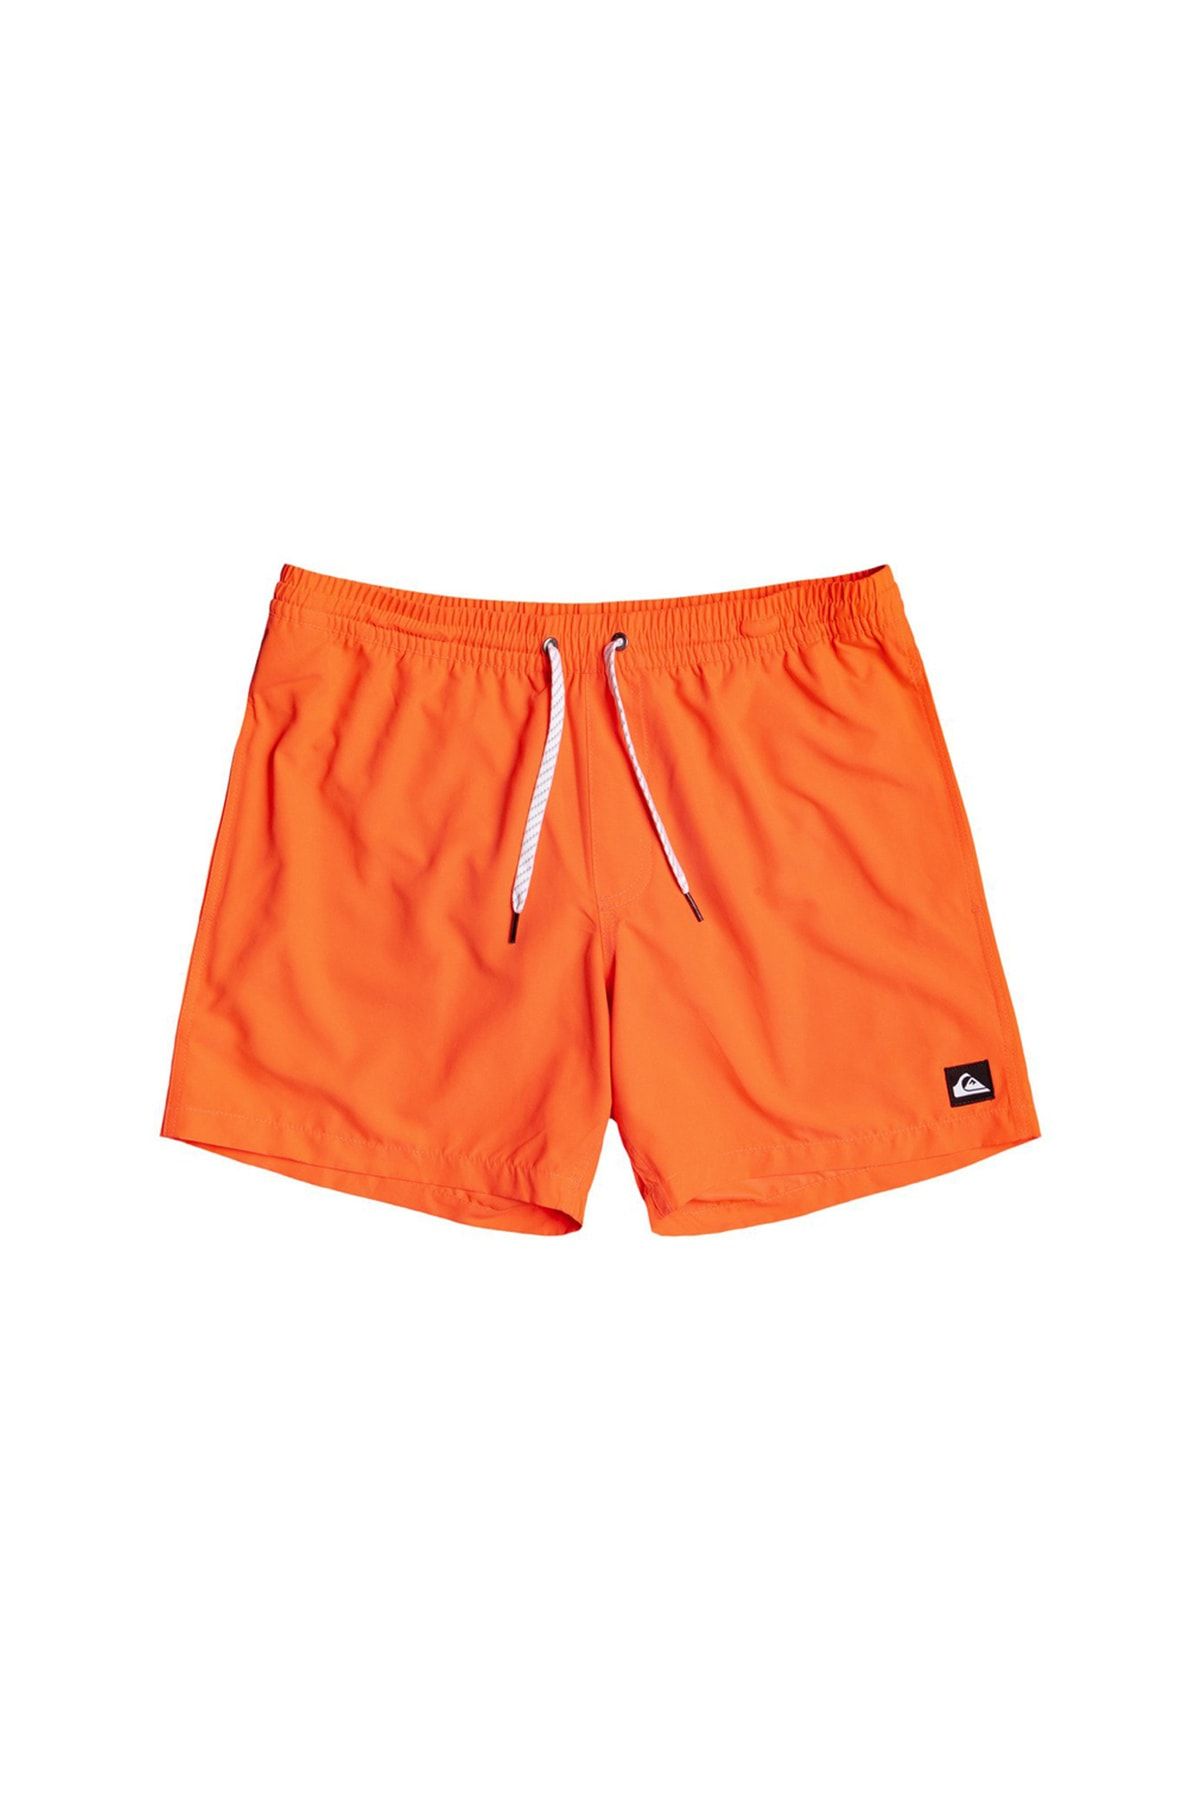 Quiksilver Everyday Volley Youth 13